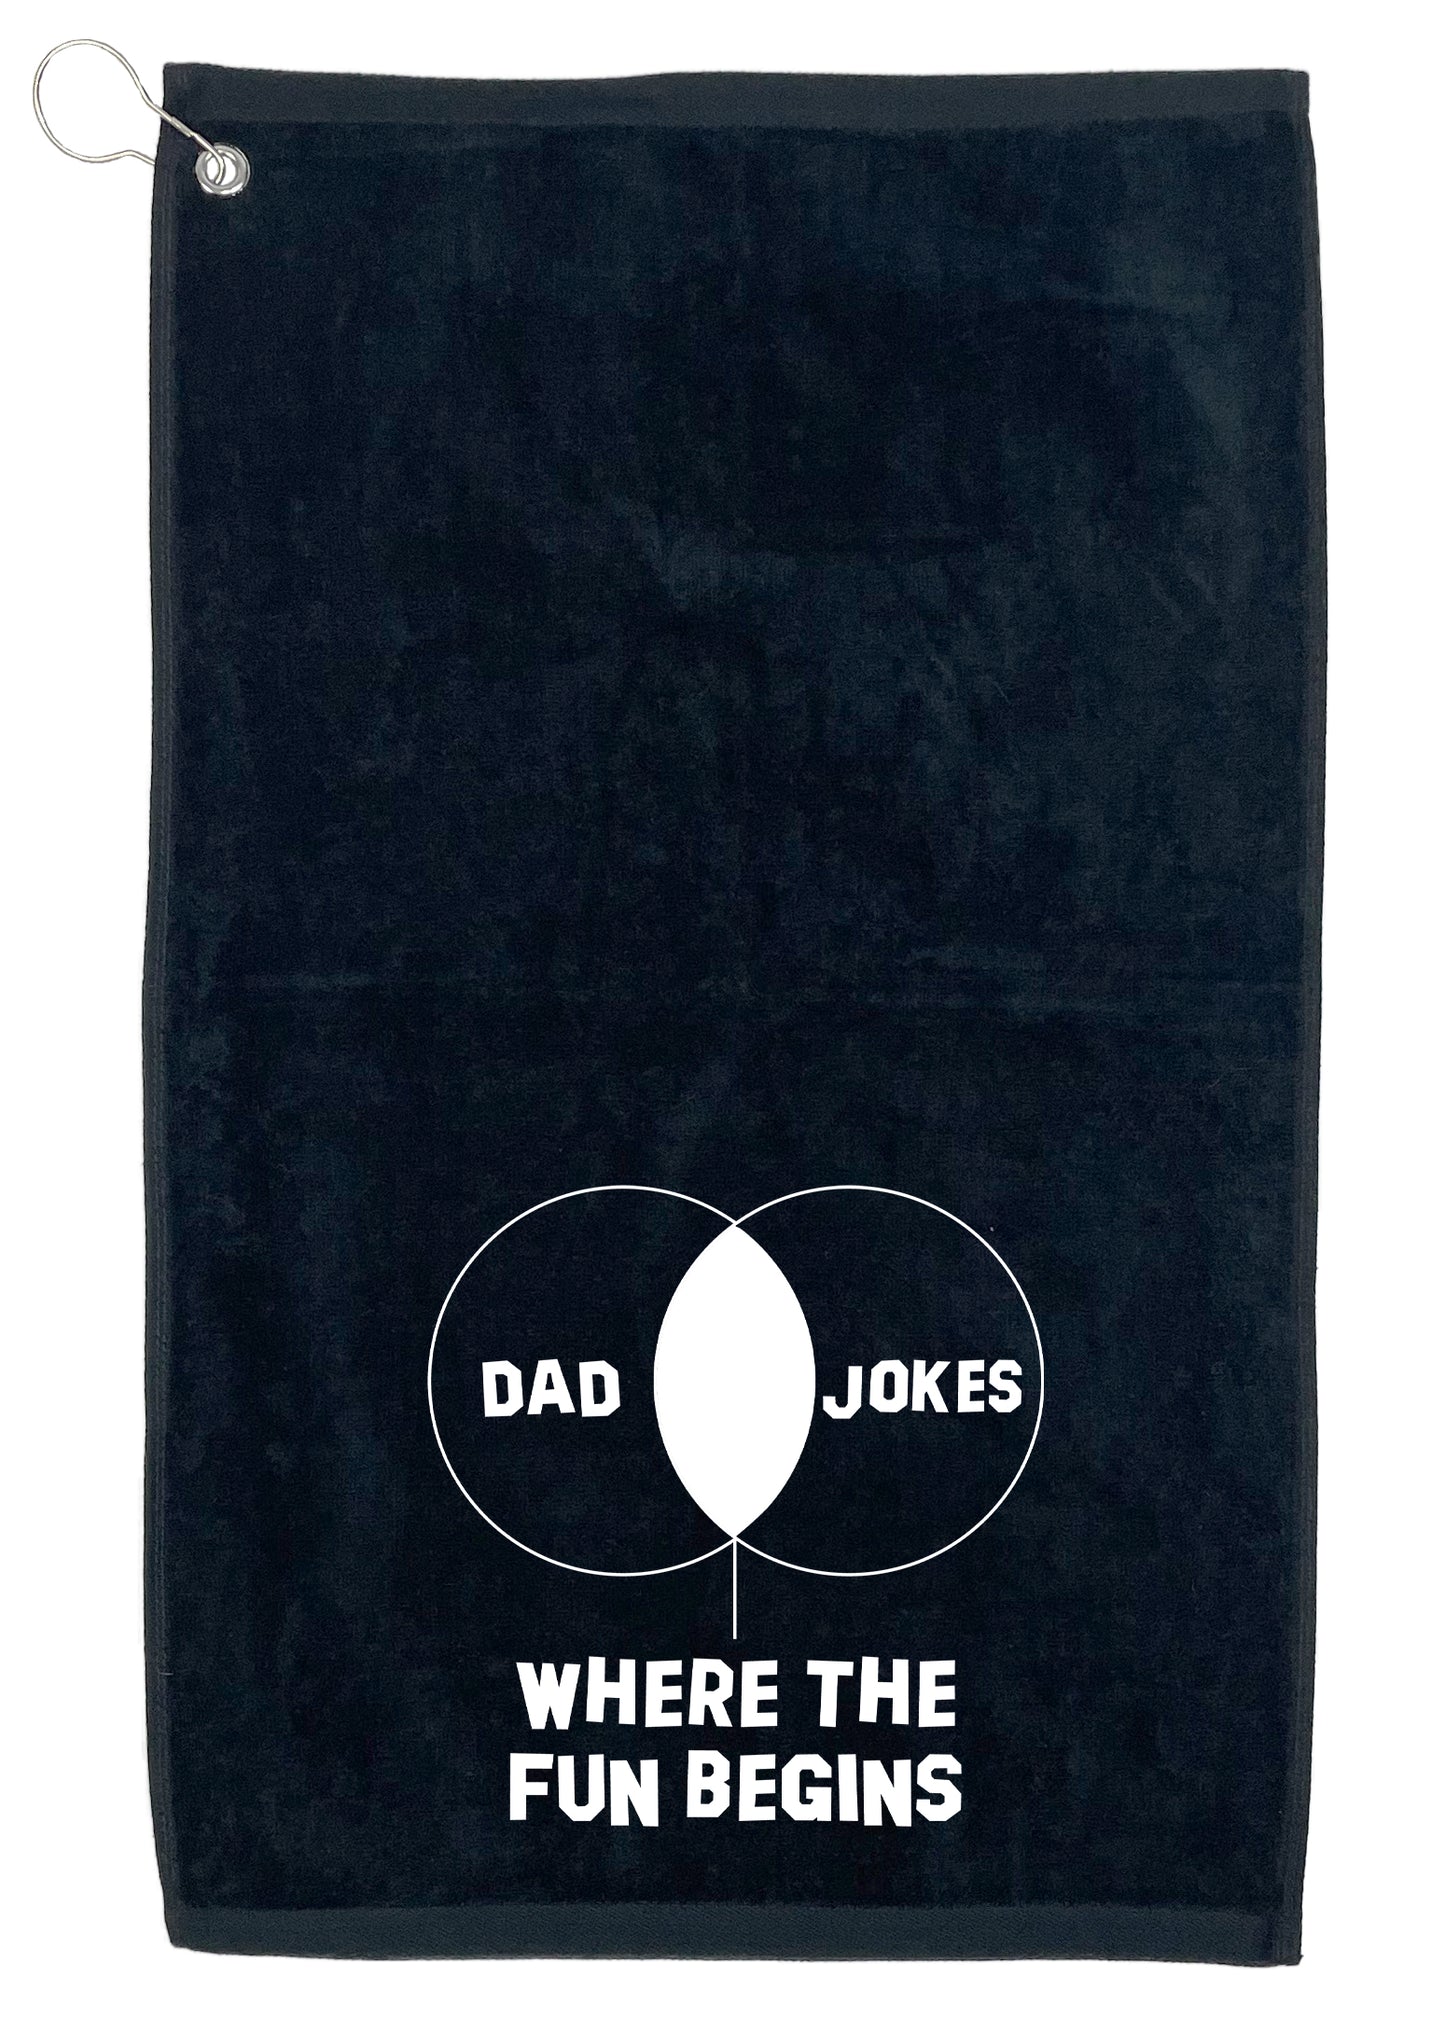 Dad Jokes! Where The Fun Begins, Golf Towel - Funny T Shirts & Graphic Tees